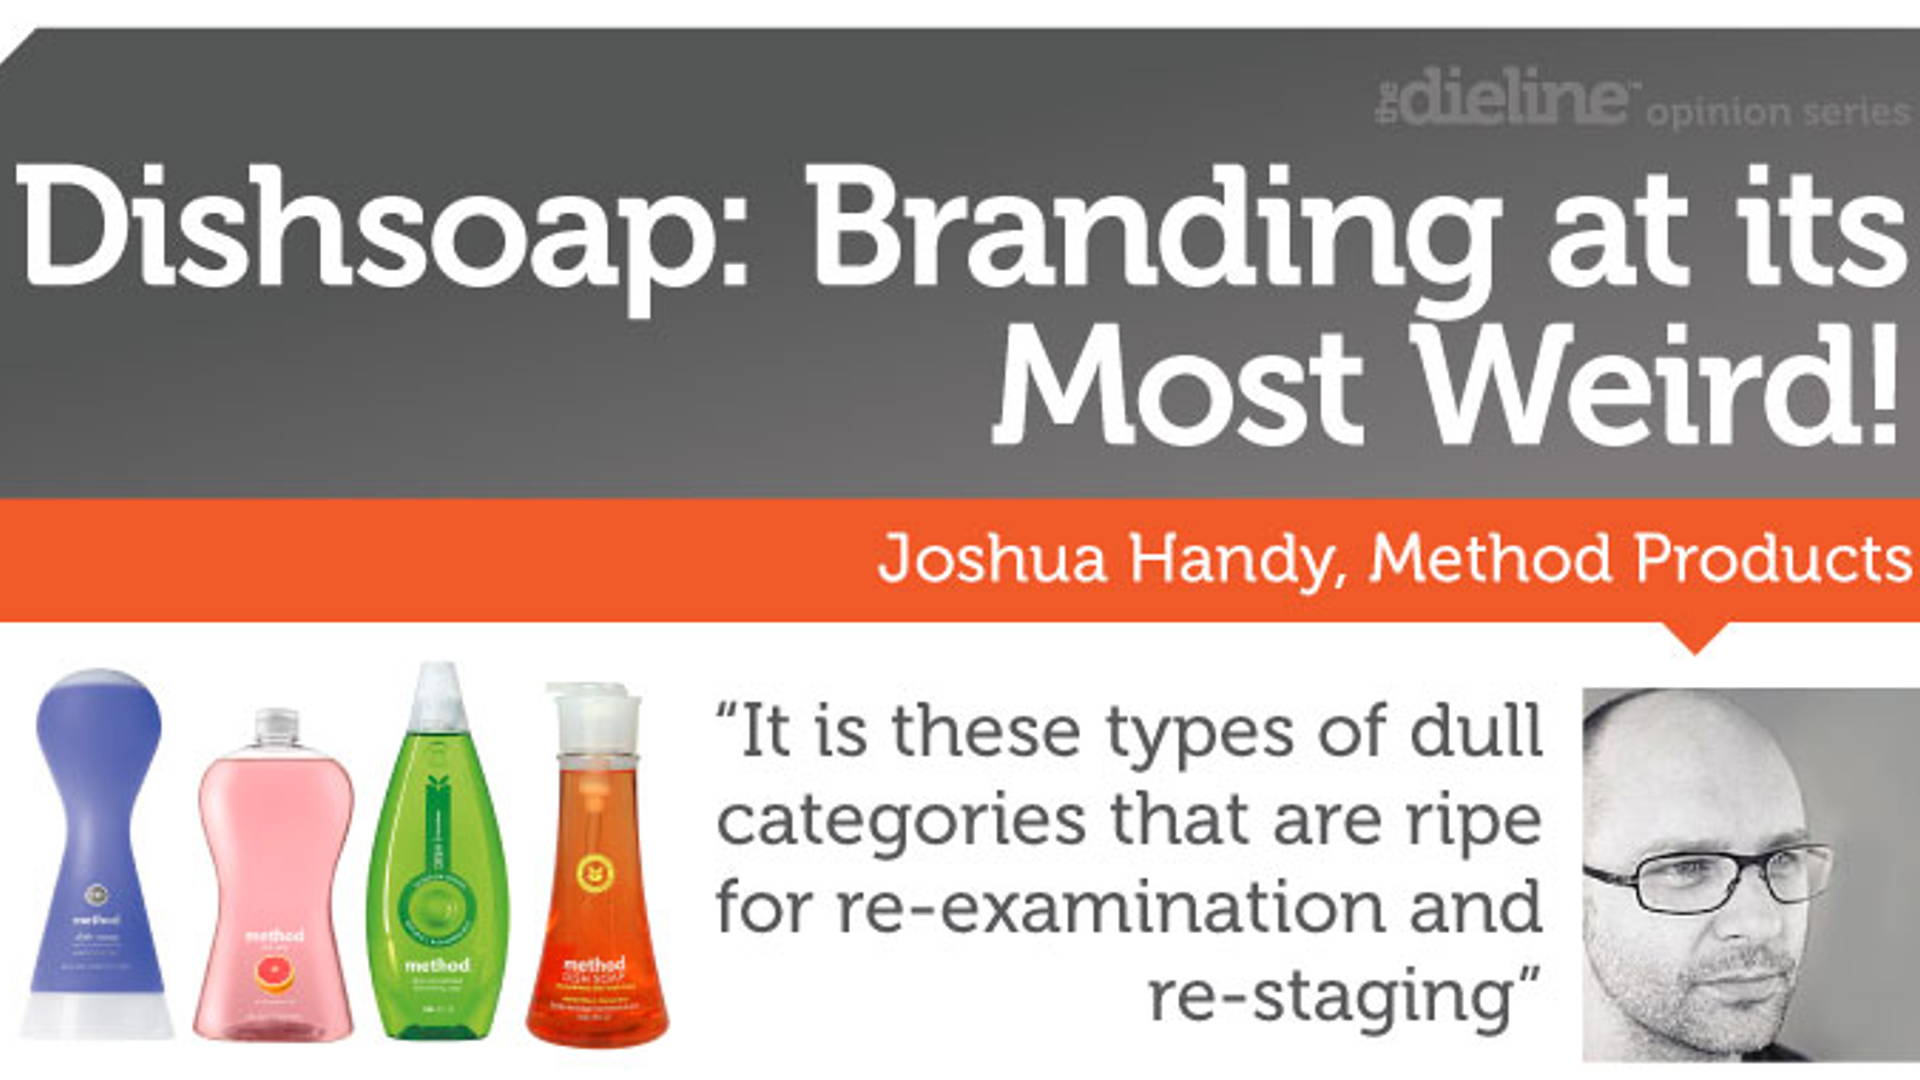 Featured image for Dishsoap: Branding at its Most Weird!